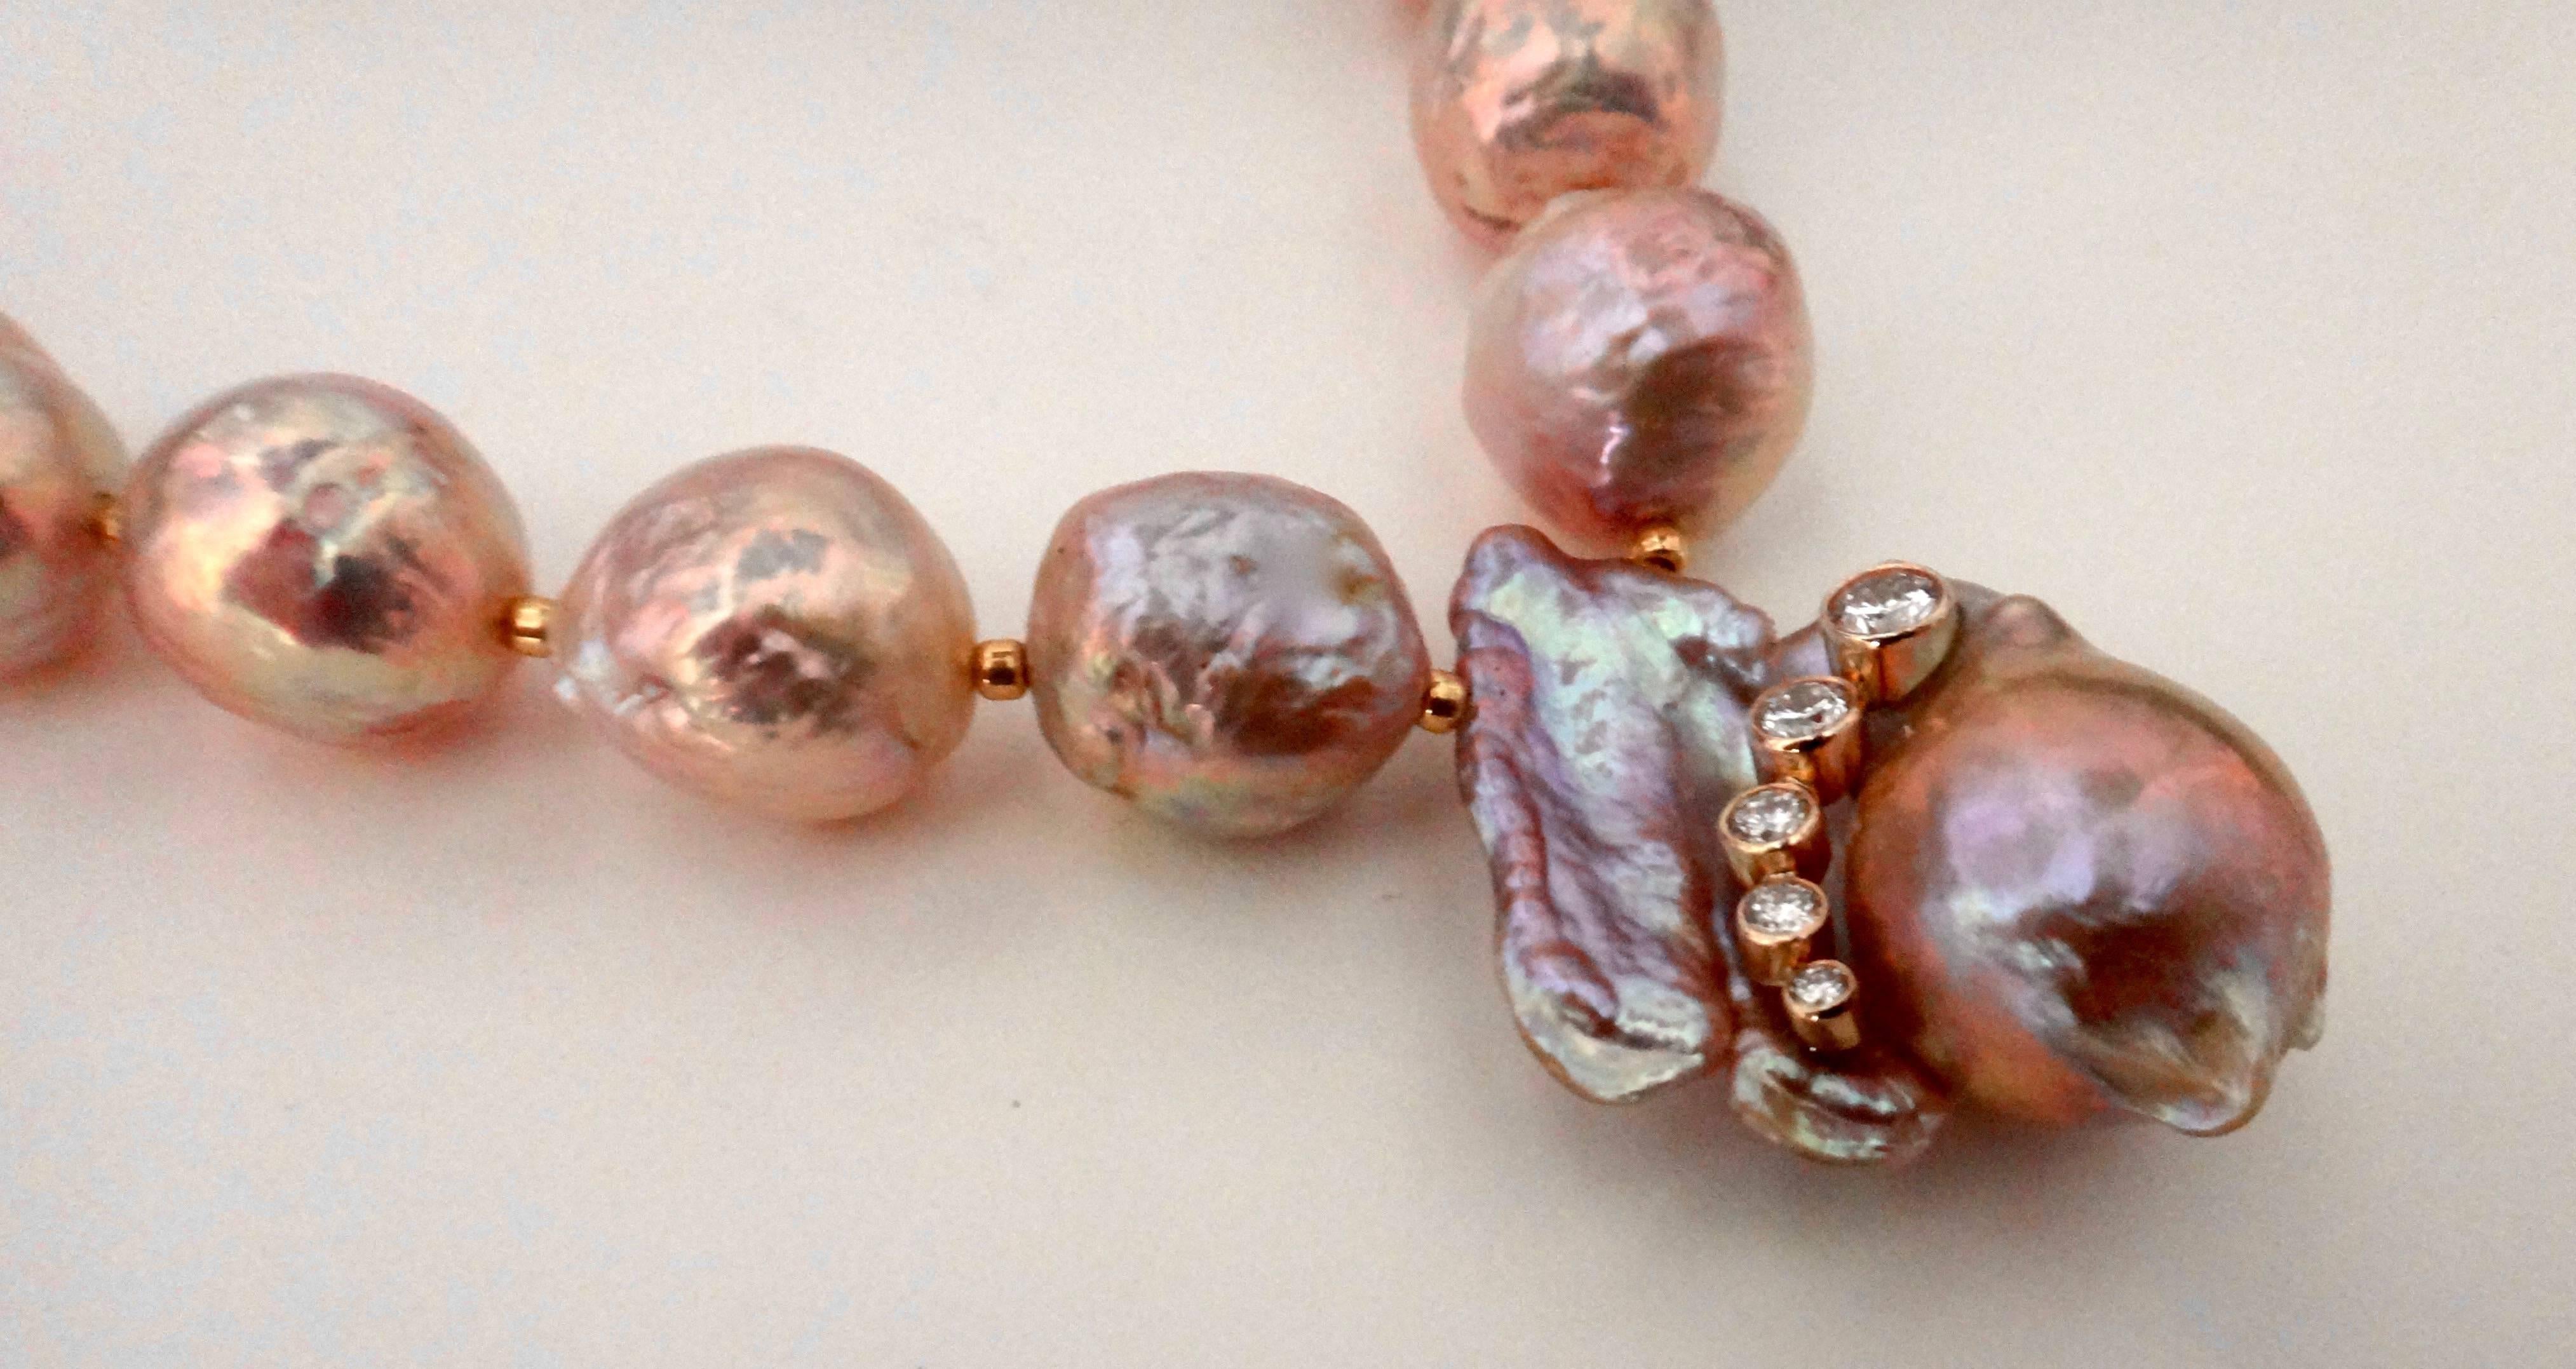 Shell pink Kasumi pearl necklace.  Kasumi pearls are large freshwater pearls with a shell bead nucleus. They are cultivated in the upstream areas of Lake Kasumi-ga-Ura, some 40 miles northeast of Tokyo.  Centered in this necklace is a very large (1